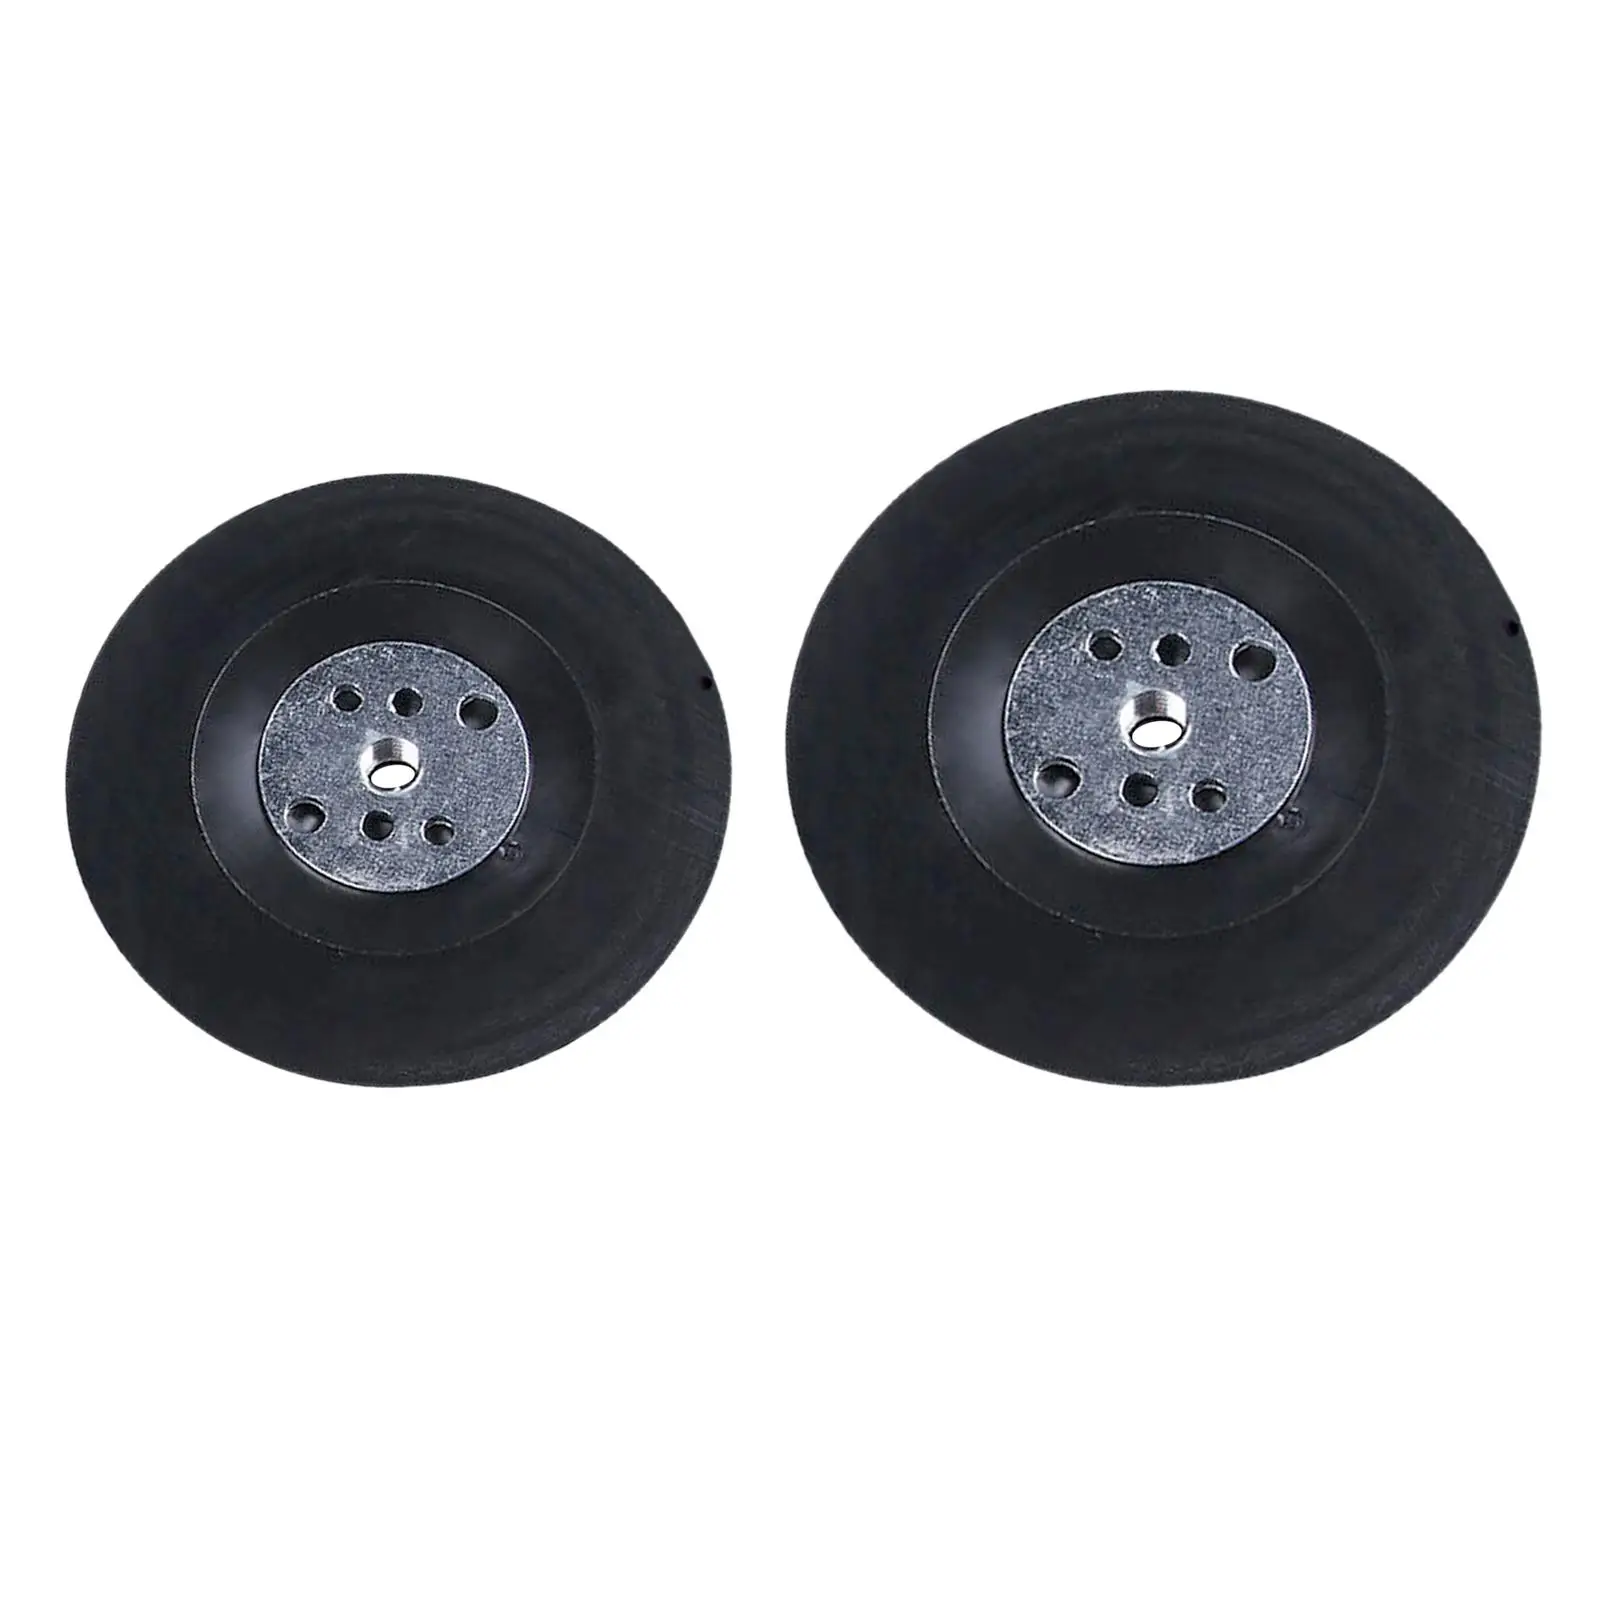 

Sanding Disc Pad Orbital Palm Sander Backing Plate with Mount Hole Sander Accessories M15/M18 for Woodworking Metal Polishing